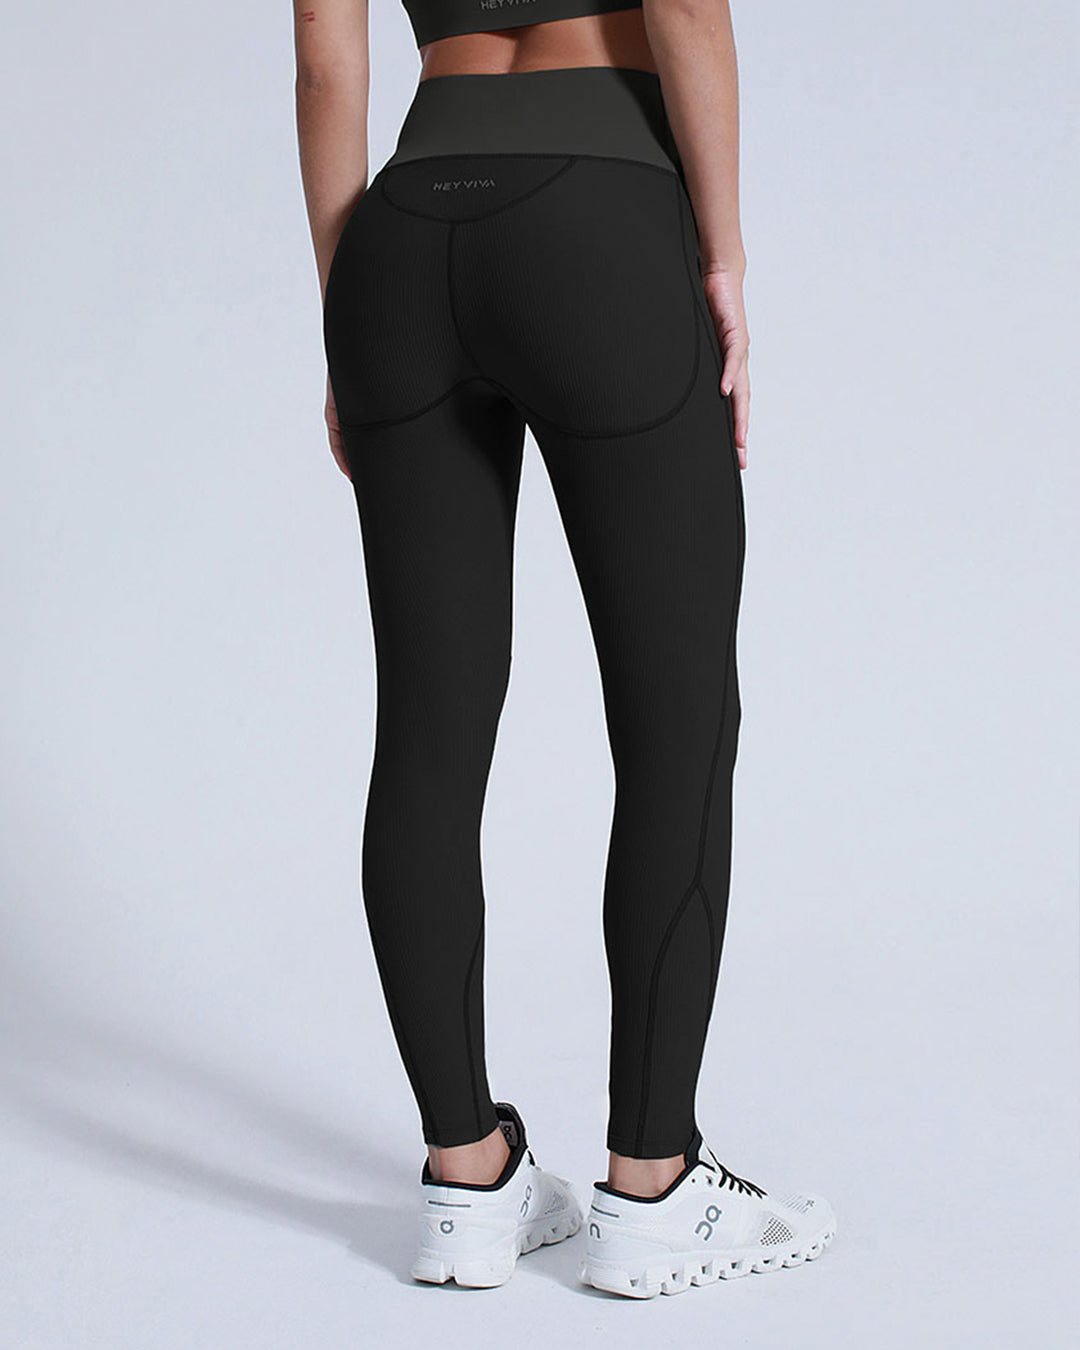 Lululemon align pants review: The pants that deliver an instant butt lift.